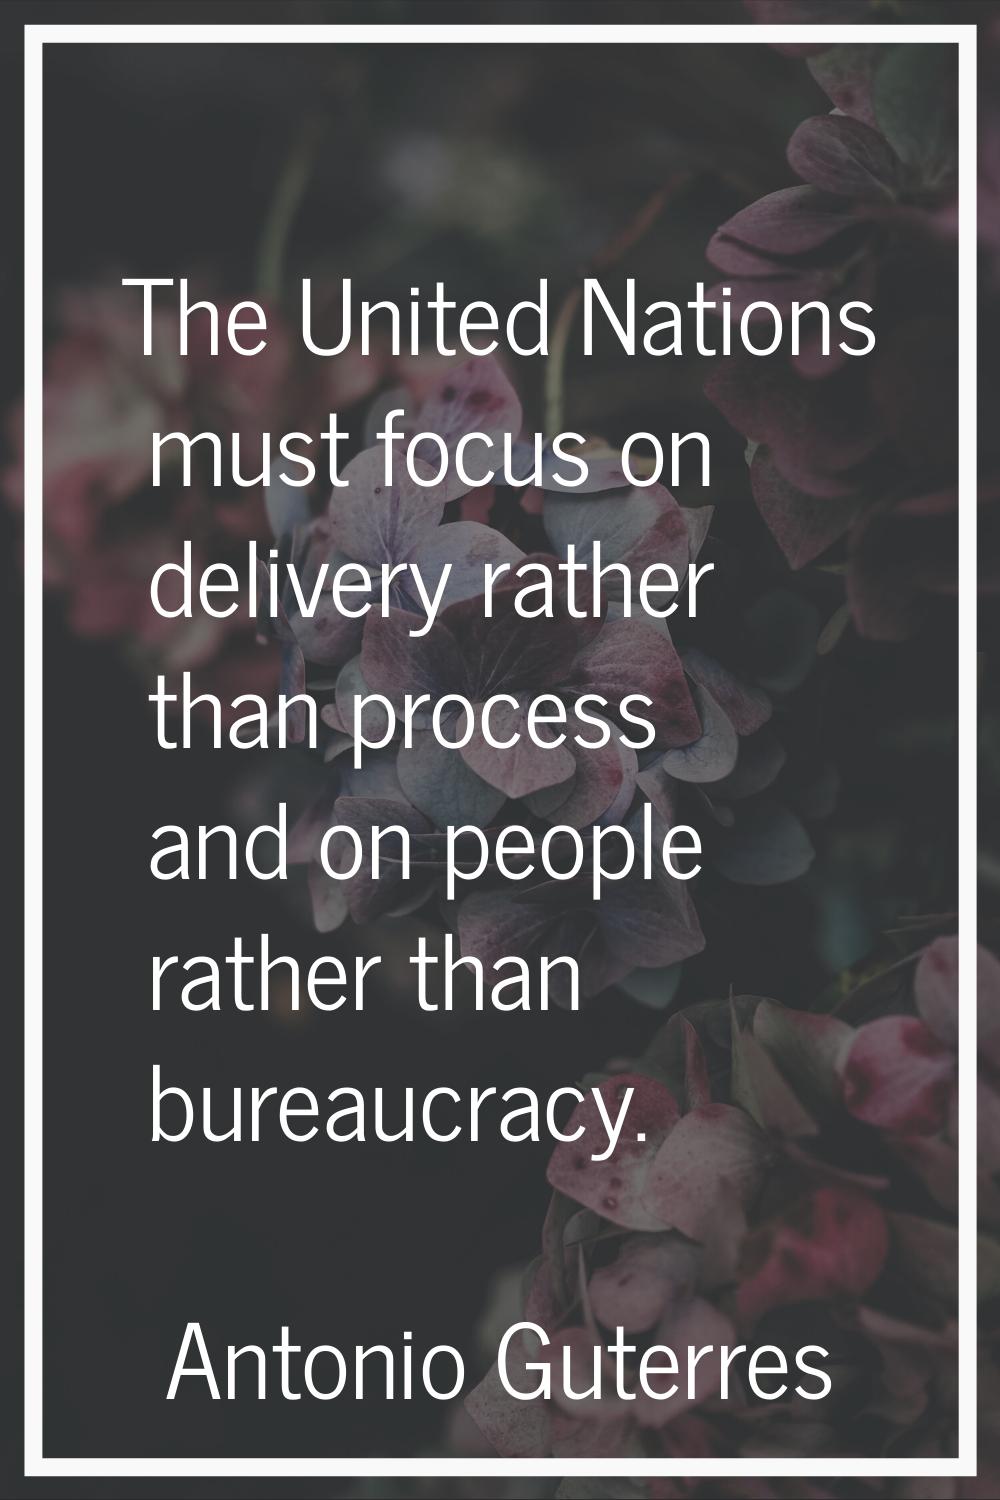 The United Nations must focus on delivery rather than process and on people rather than bureaucracy